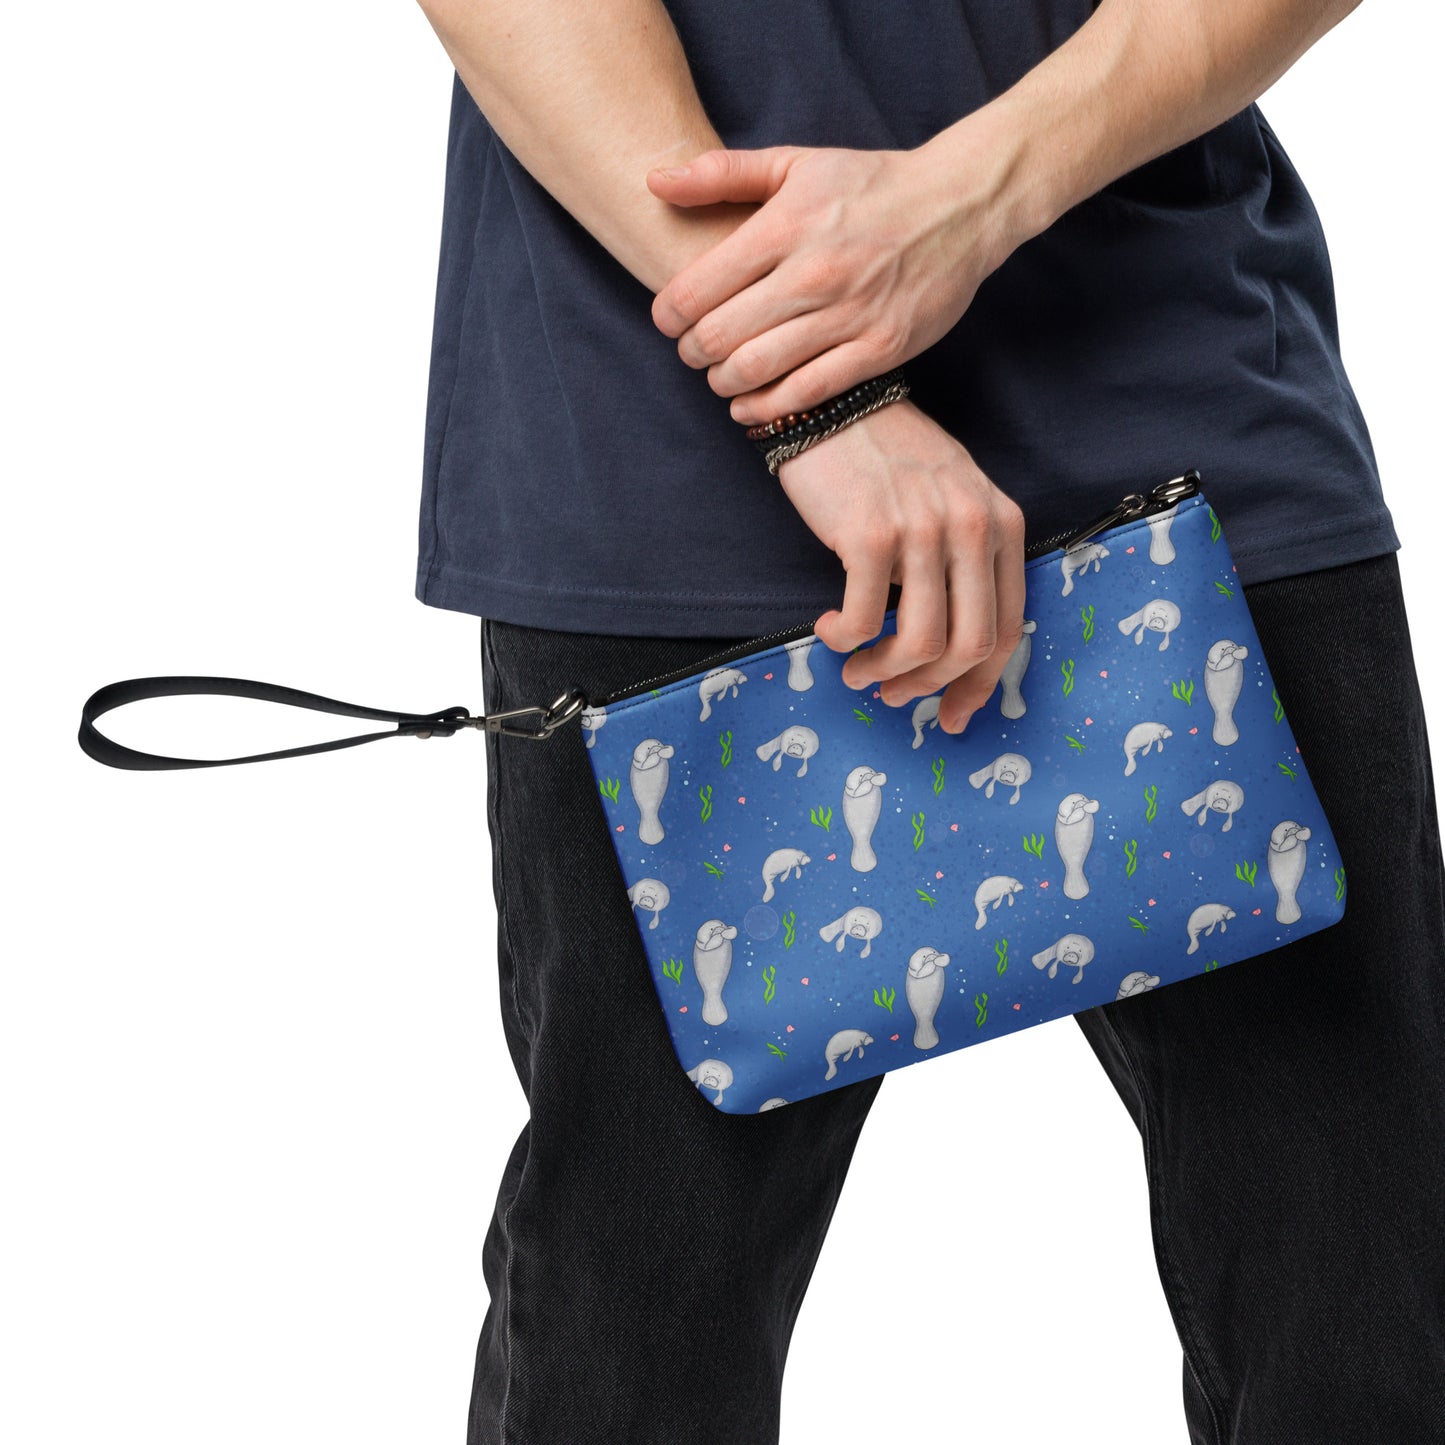 Manatee crossbody bag. Faux leather with polyester lining and dark grey hardware. Comes with adjustable removable wrist and shoulder straps. Back view of bag with manatees patterned on a dark blue background. Shown in model's hand.